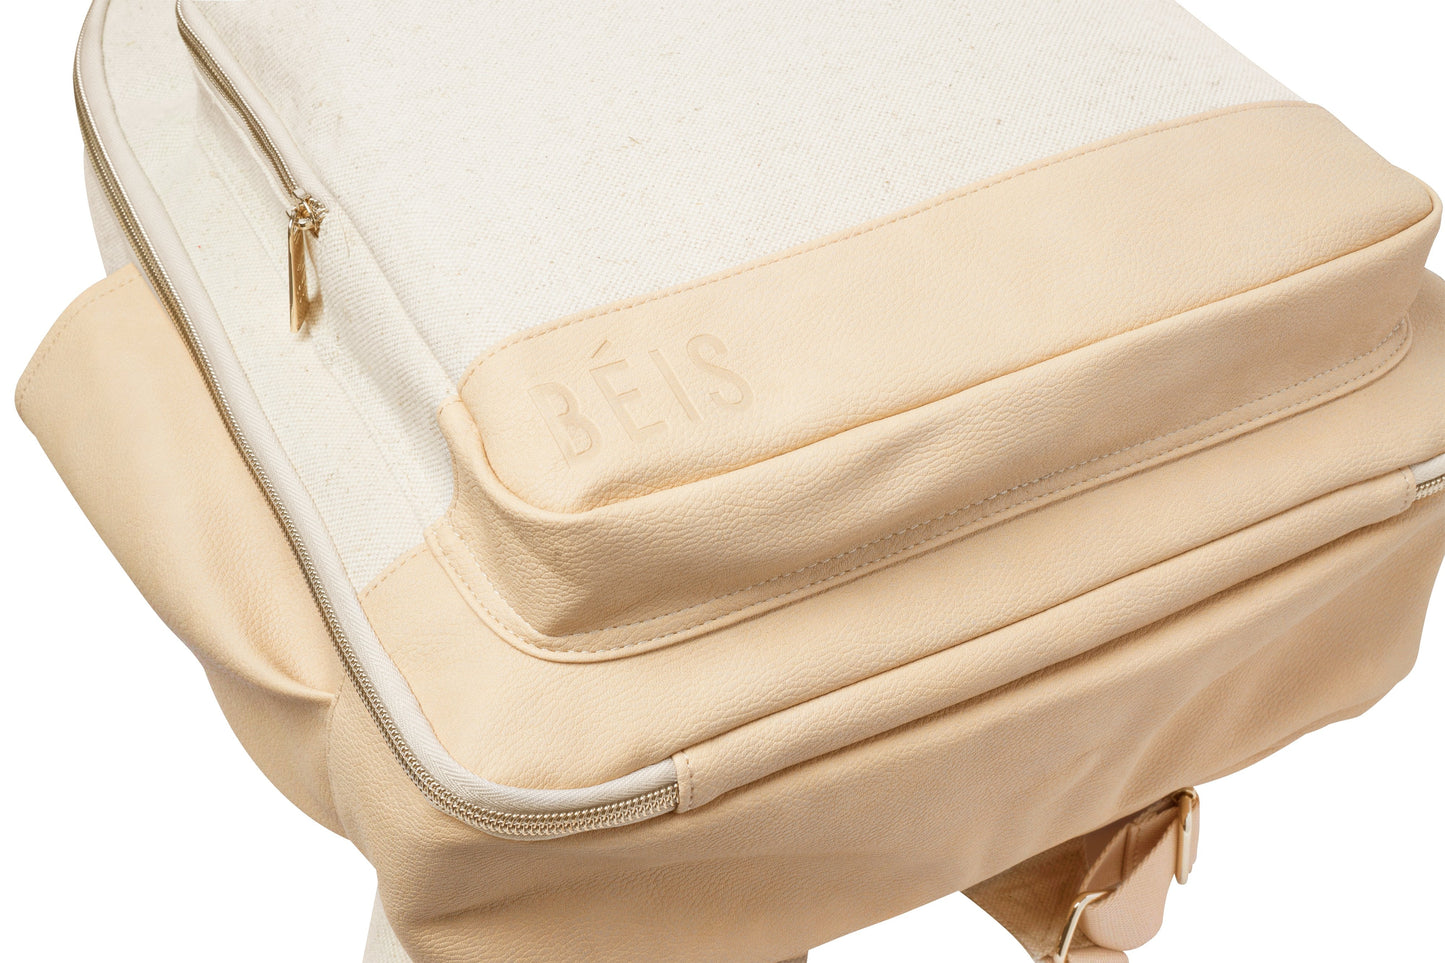 The Backpack in Beige